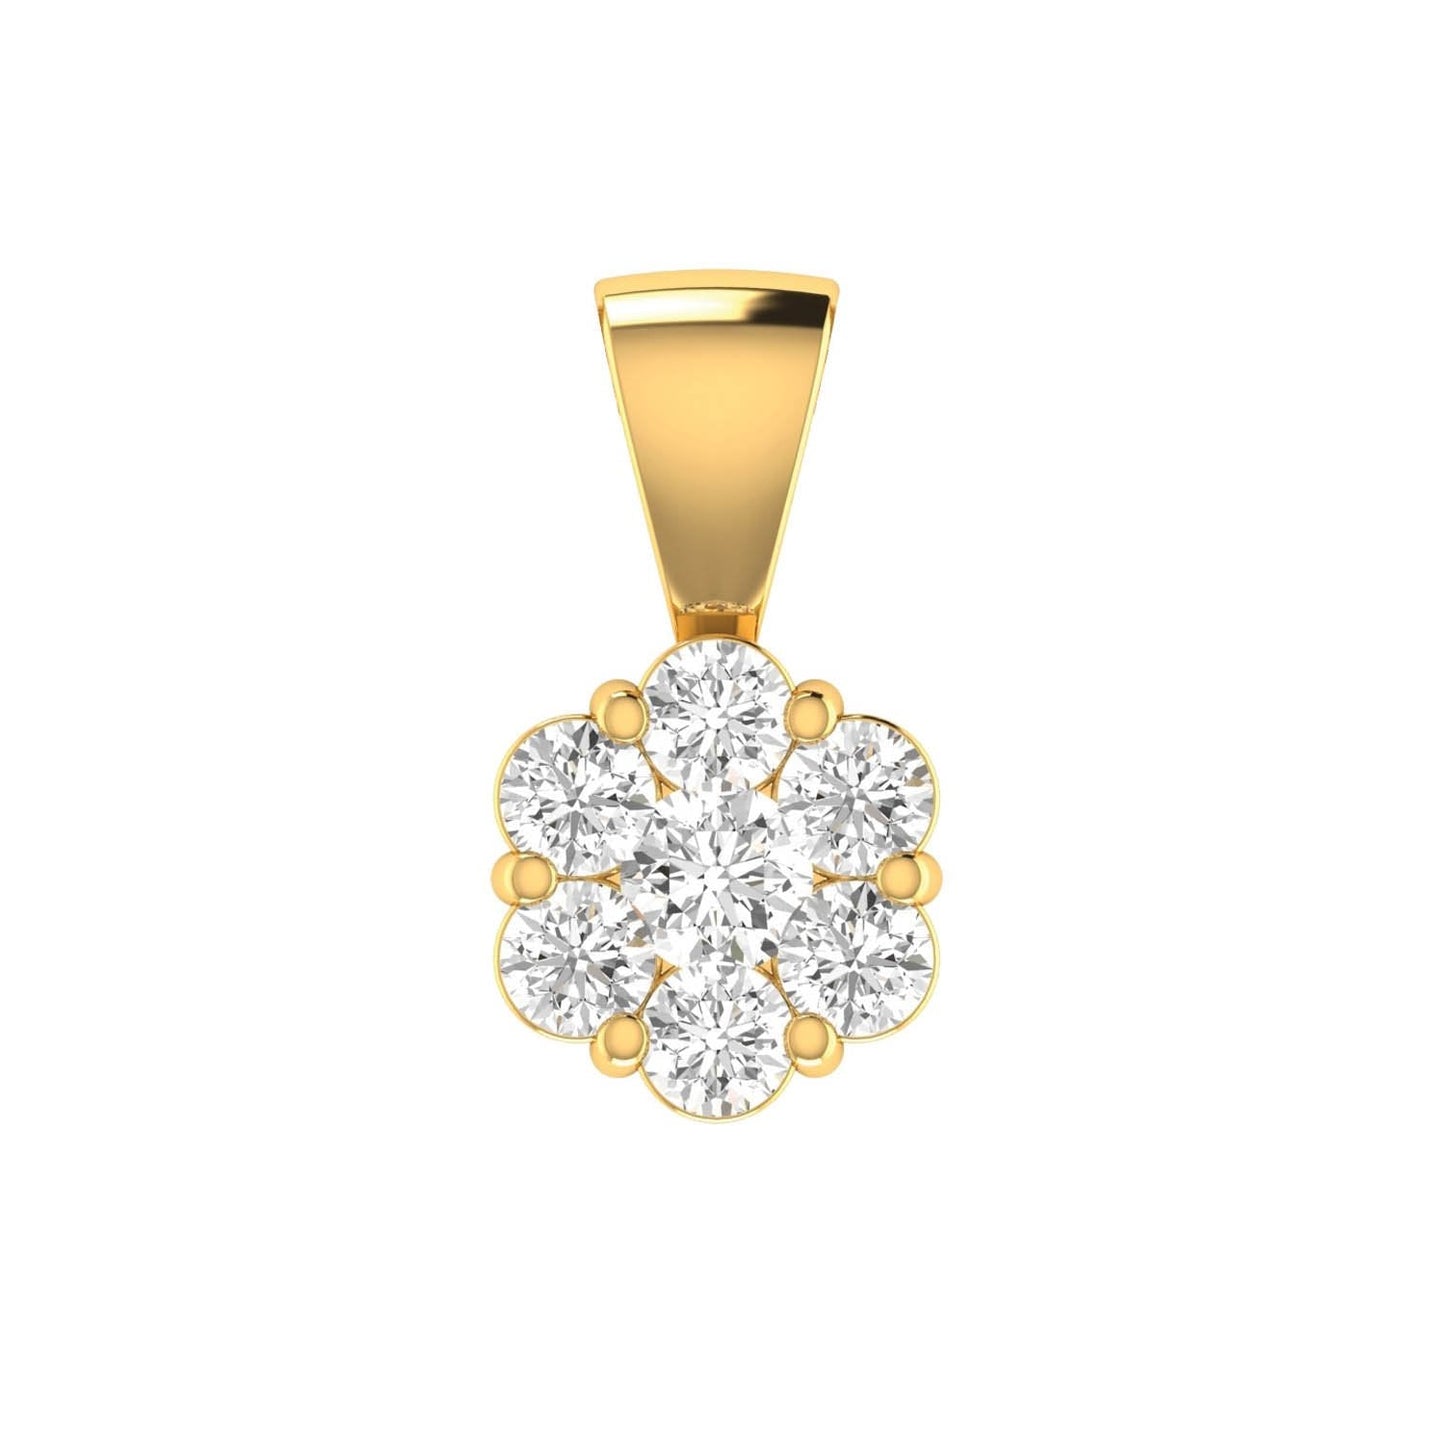 Cluster Diamond Pendant with 0.75ct Diamonds in 9K Yellow Gold - RJ9YPCLUS75GH